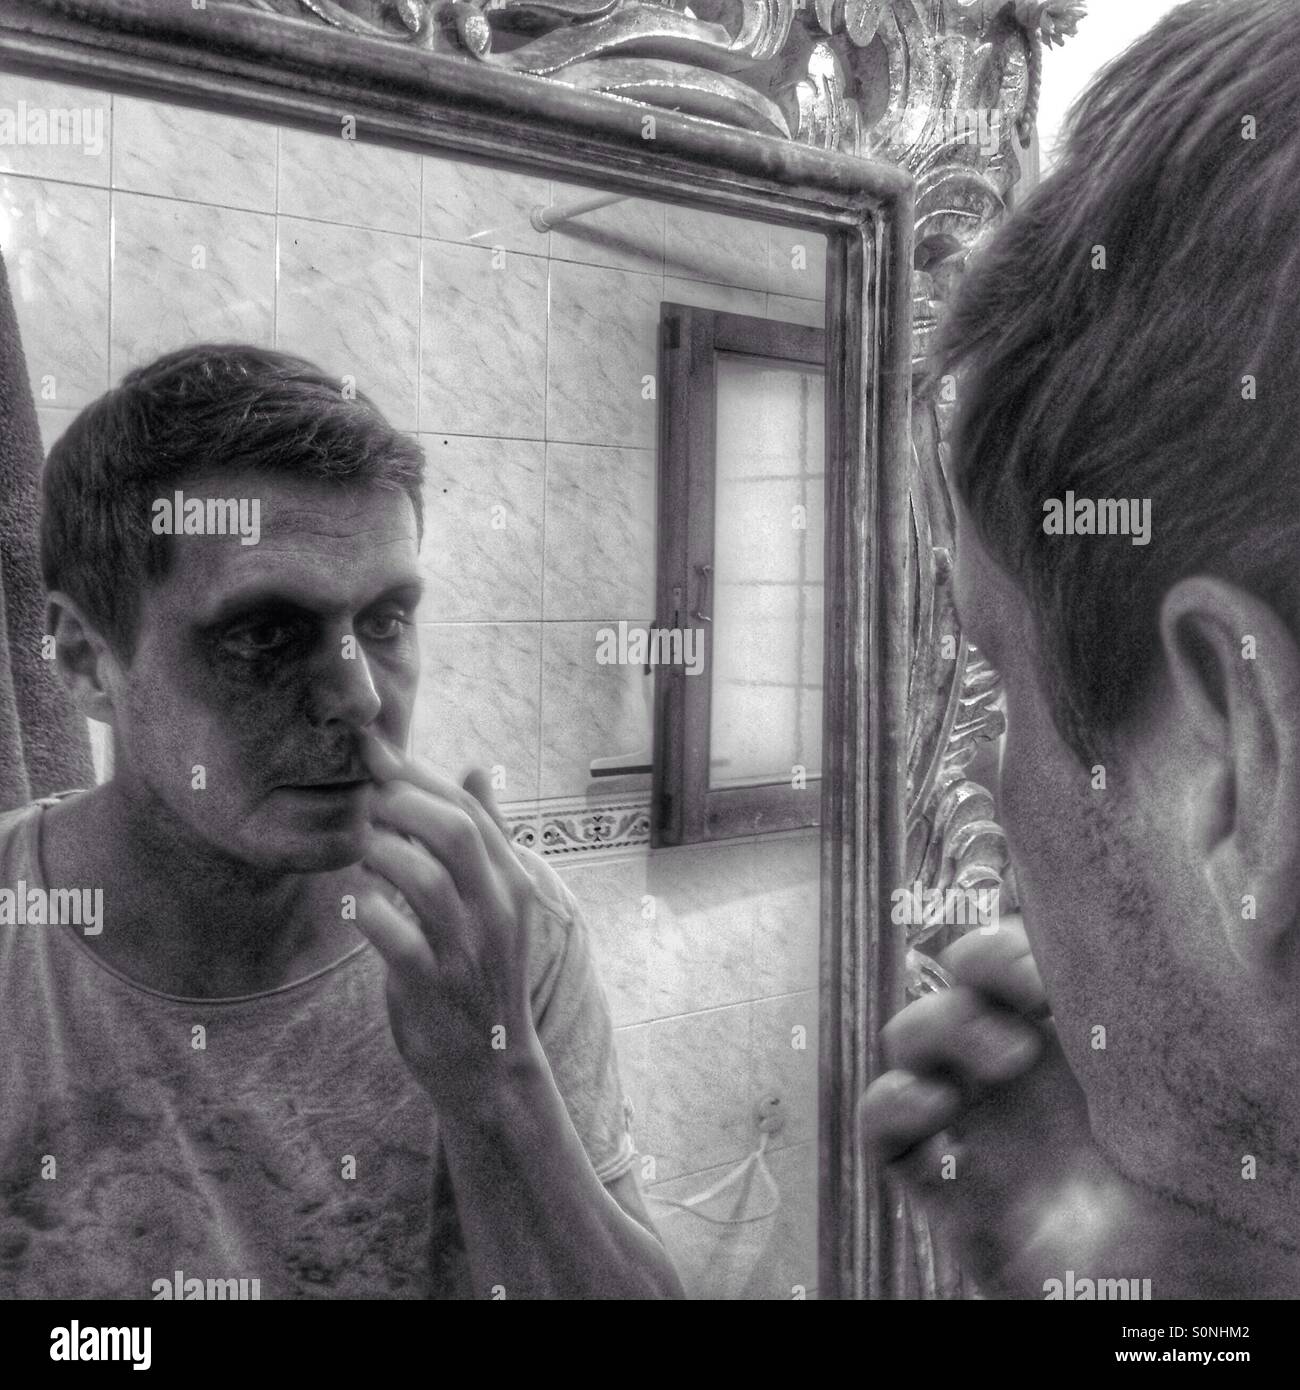 Man putting on make up in mirror Stock Photo